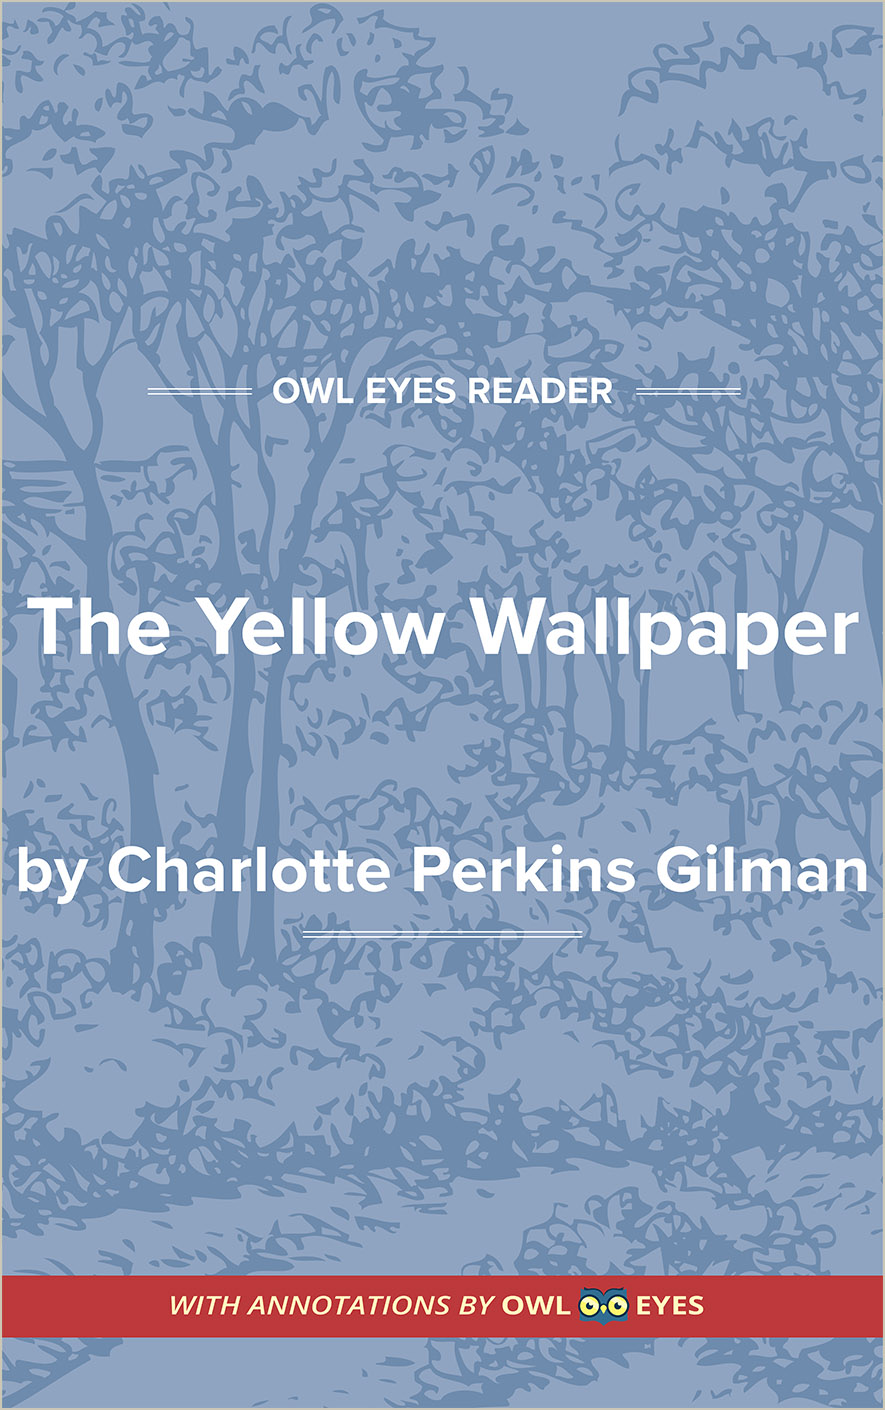 the yellow wallpaper by charlotte perkins gilman analysis